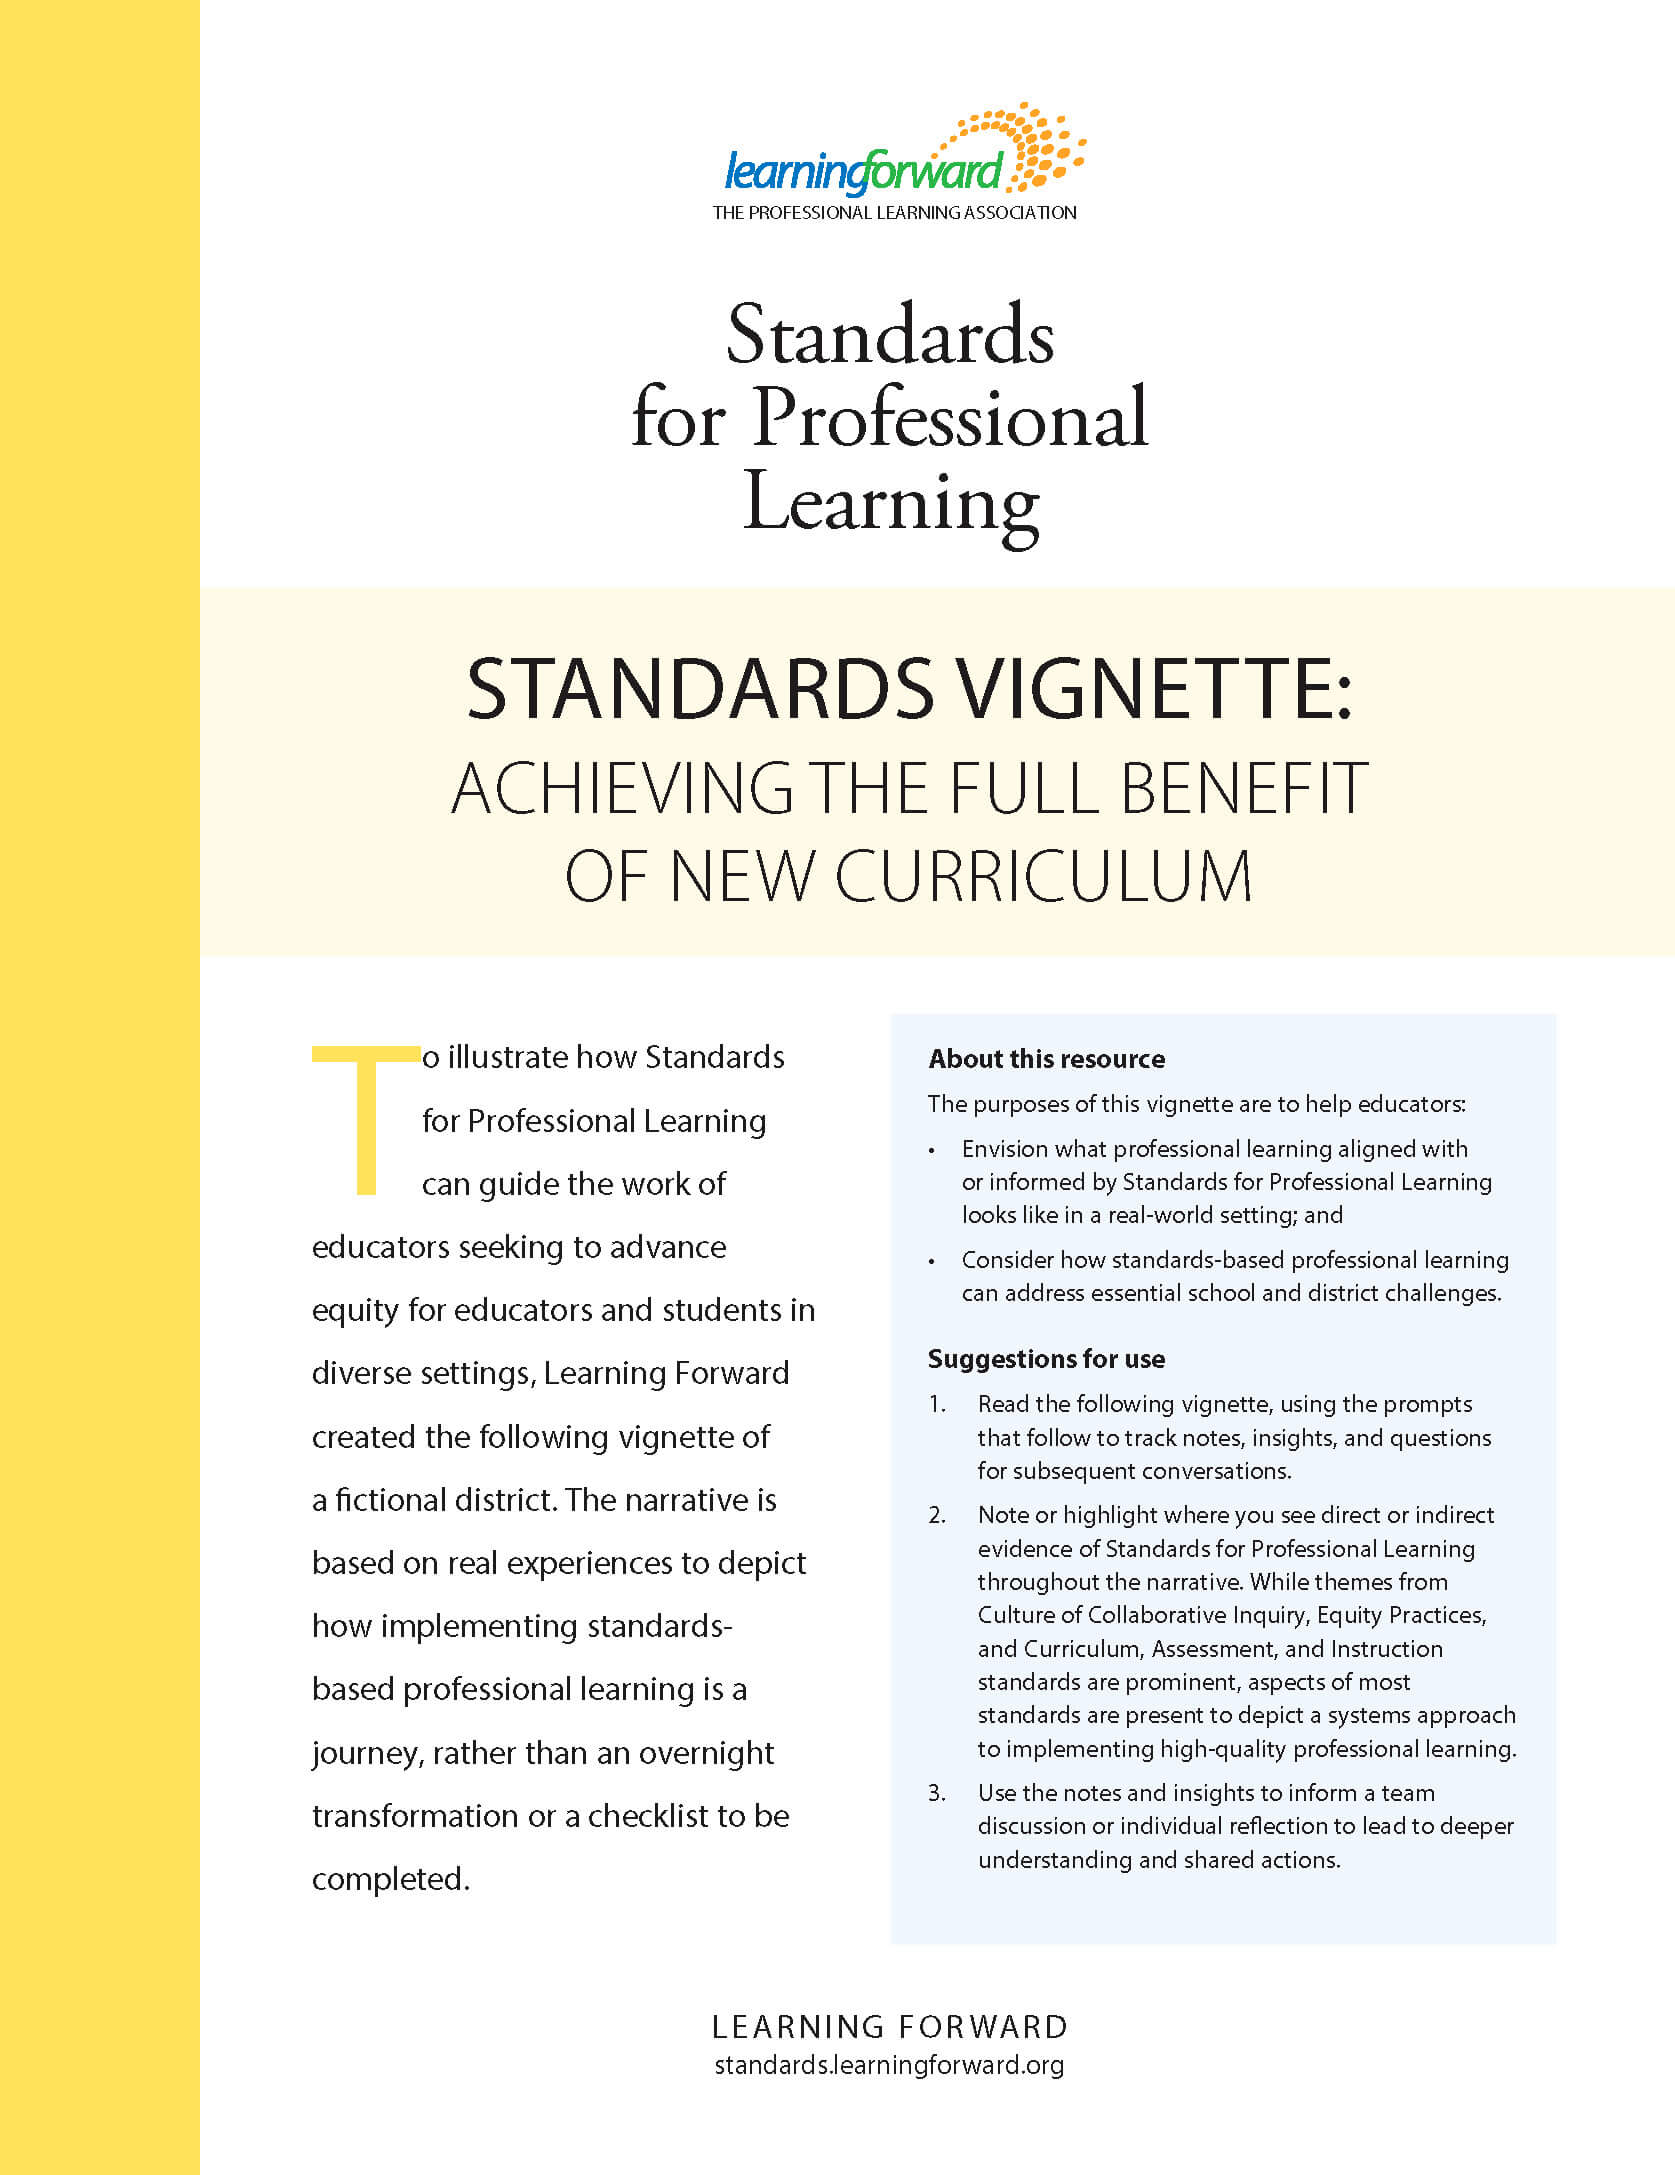 COVER image from STANDARDS VIGNETTE: ACHIEVING THE FULL BENEFIT OF NEW CURRICULUM